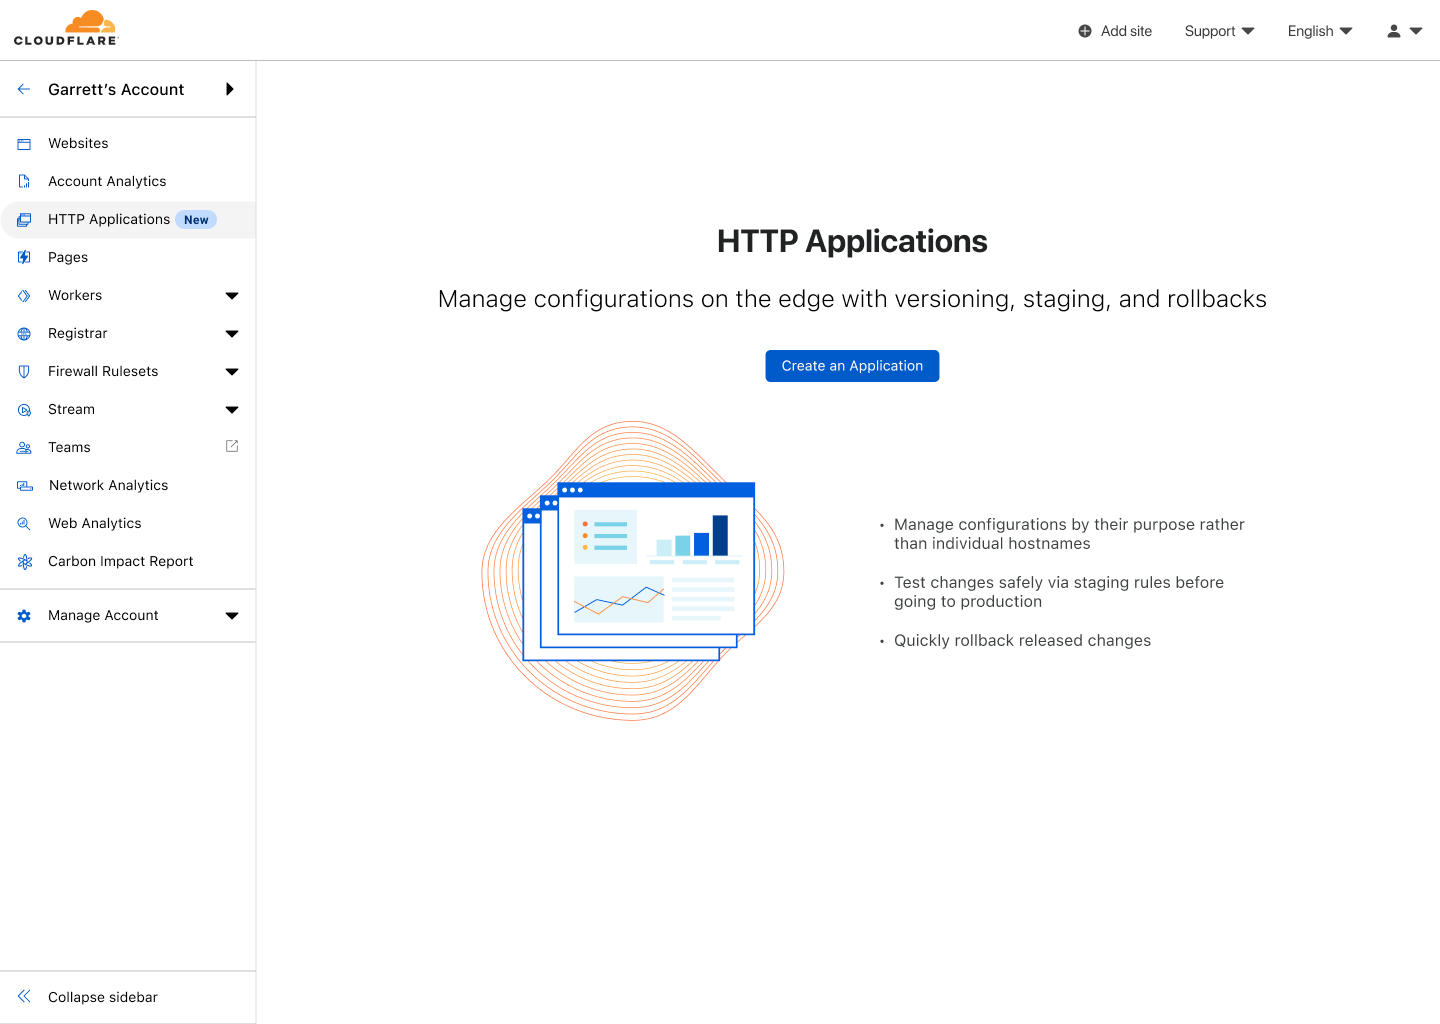 The Cloudflare Dashboard showing the empty state page for HTTP Applications